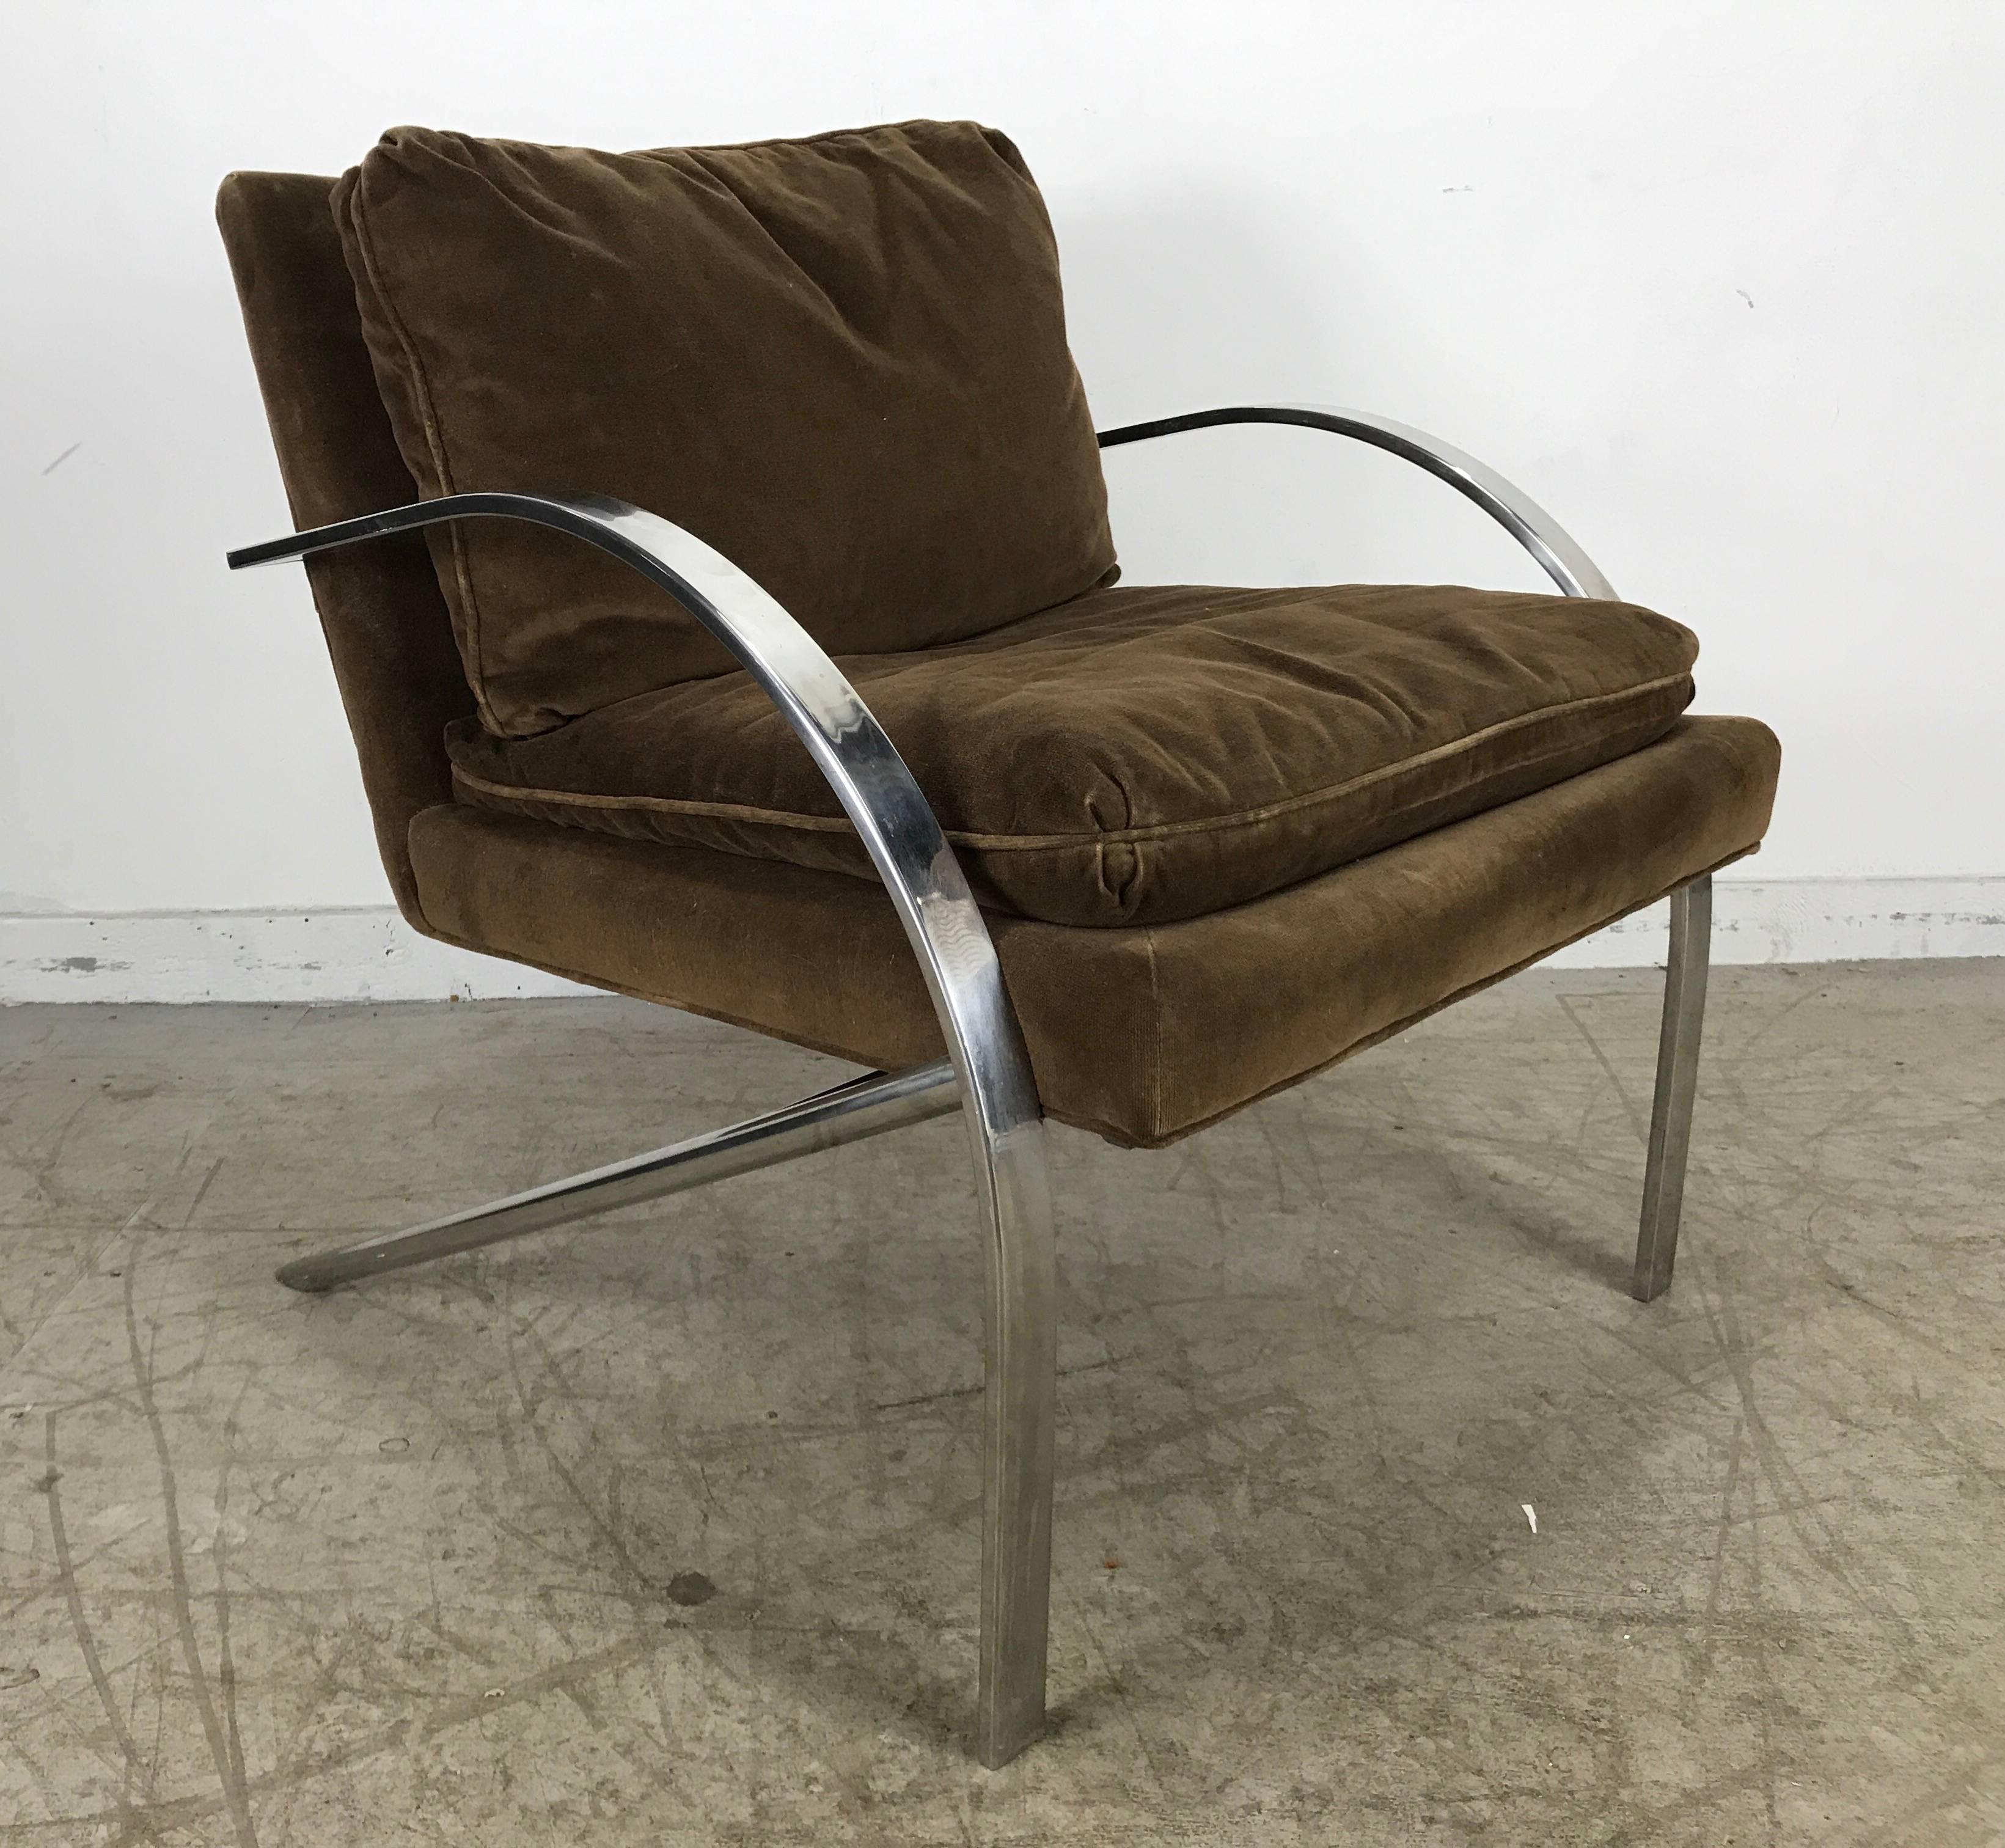 Striking Minimalist aluminium frame with contrasting chocolate brown velvet upholstery. 

Superior quality that Bernhardt is recognized for. Exquisitely crafted welded joints. 

Extremely comfortable.